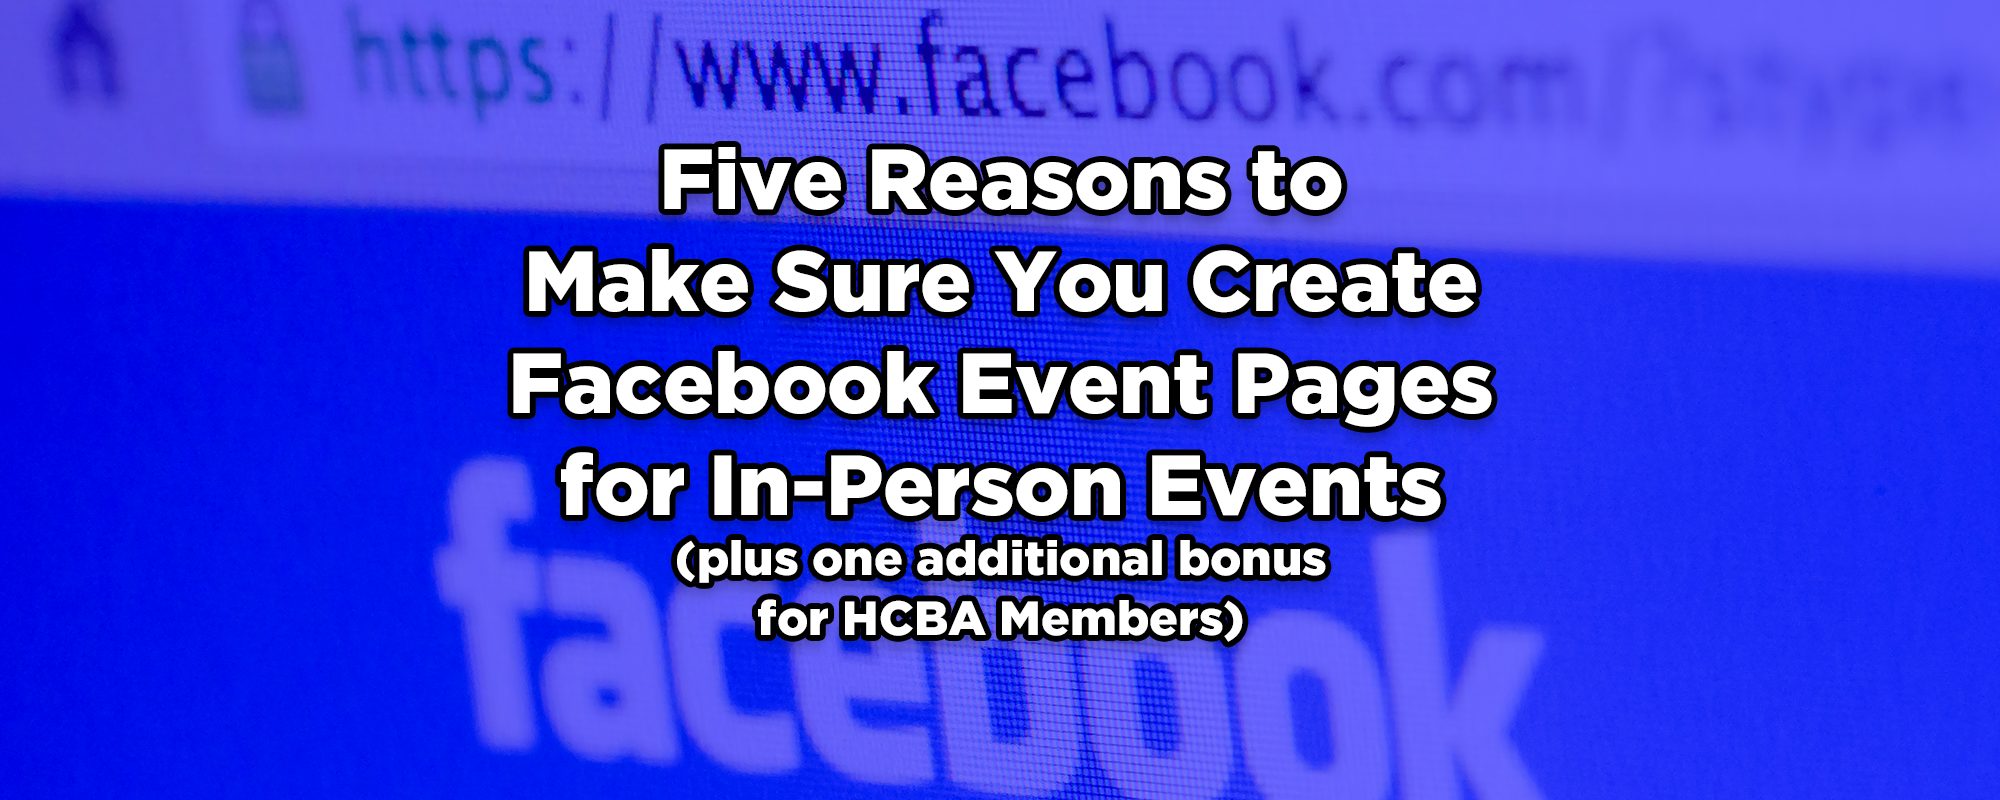 Background graphic: Zoom in of top of Facebook login screen. Text: Five Reasons to Make Sure You Create Facebook Event Pages for In-Person Events (plus one additional bonus for HCBA Members)